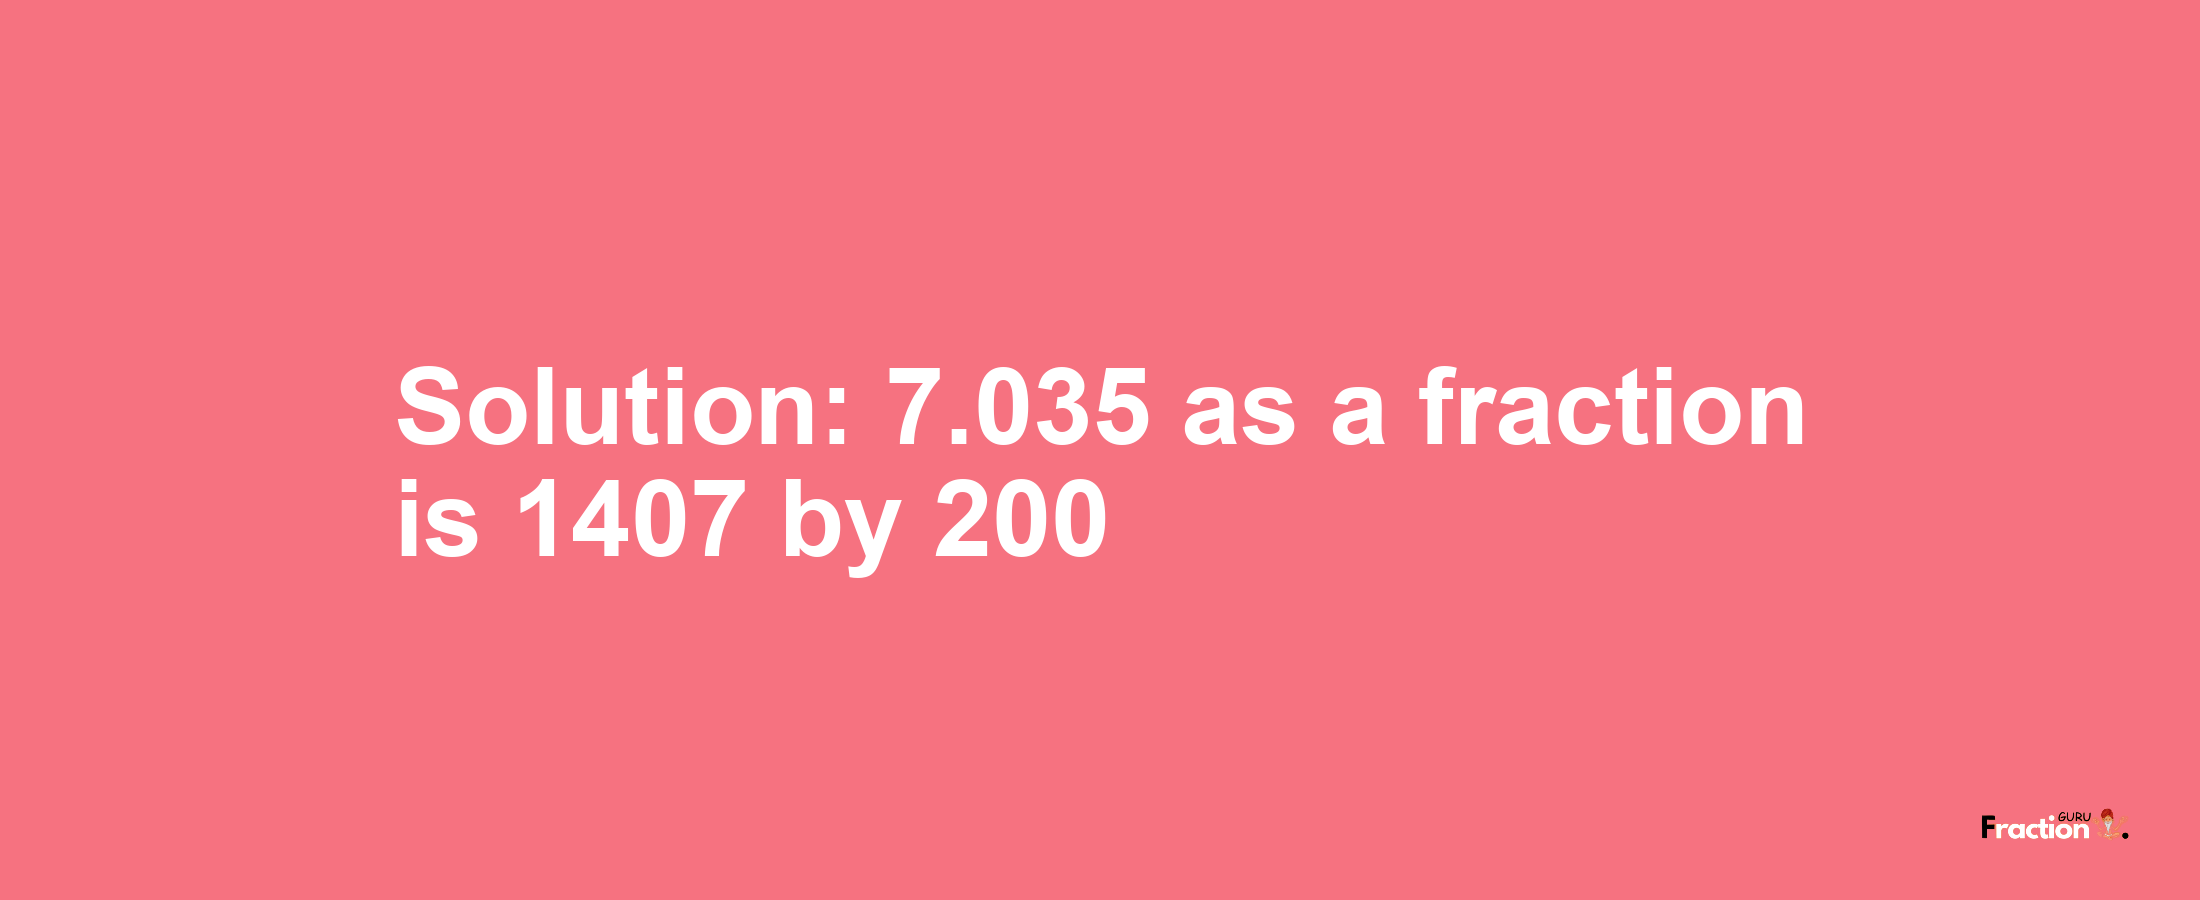 Solution:7.035 as a fraction is 1407/200